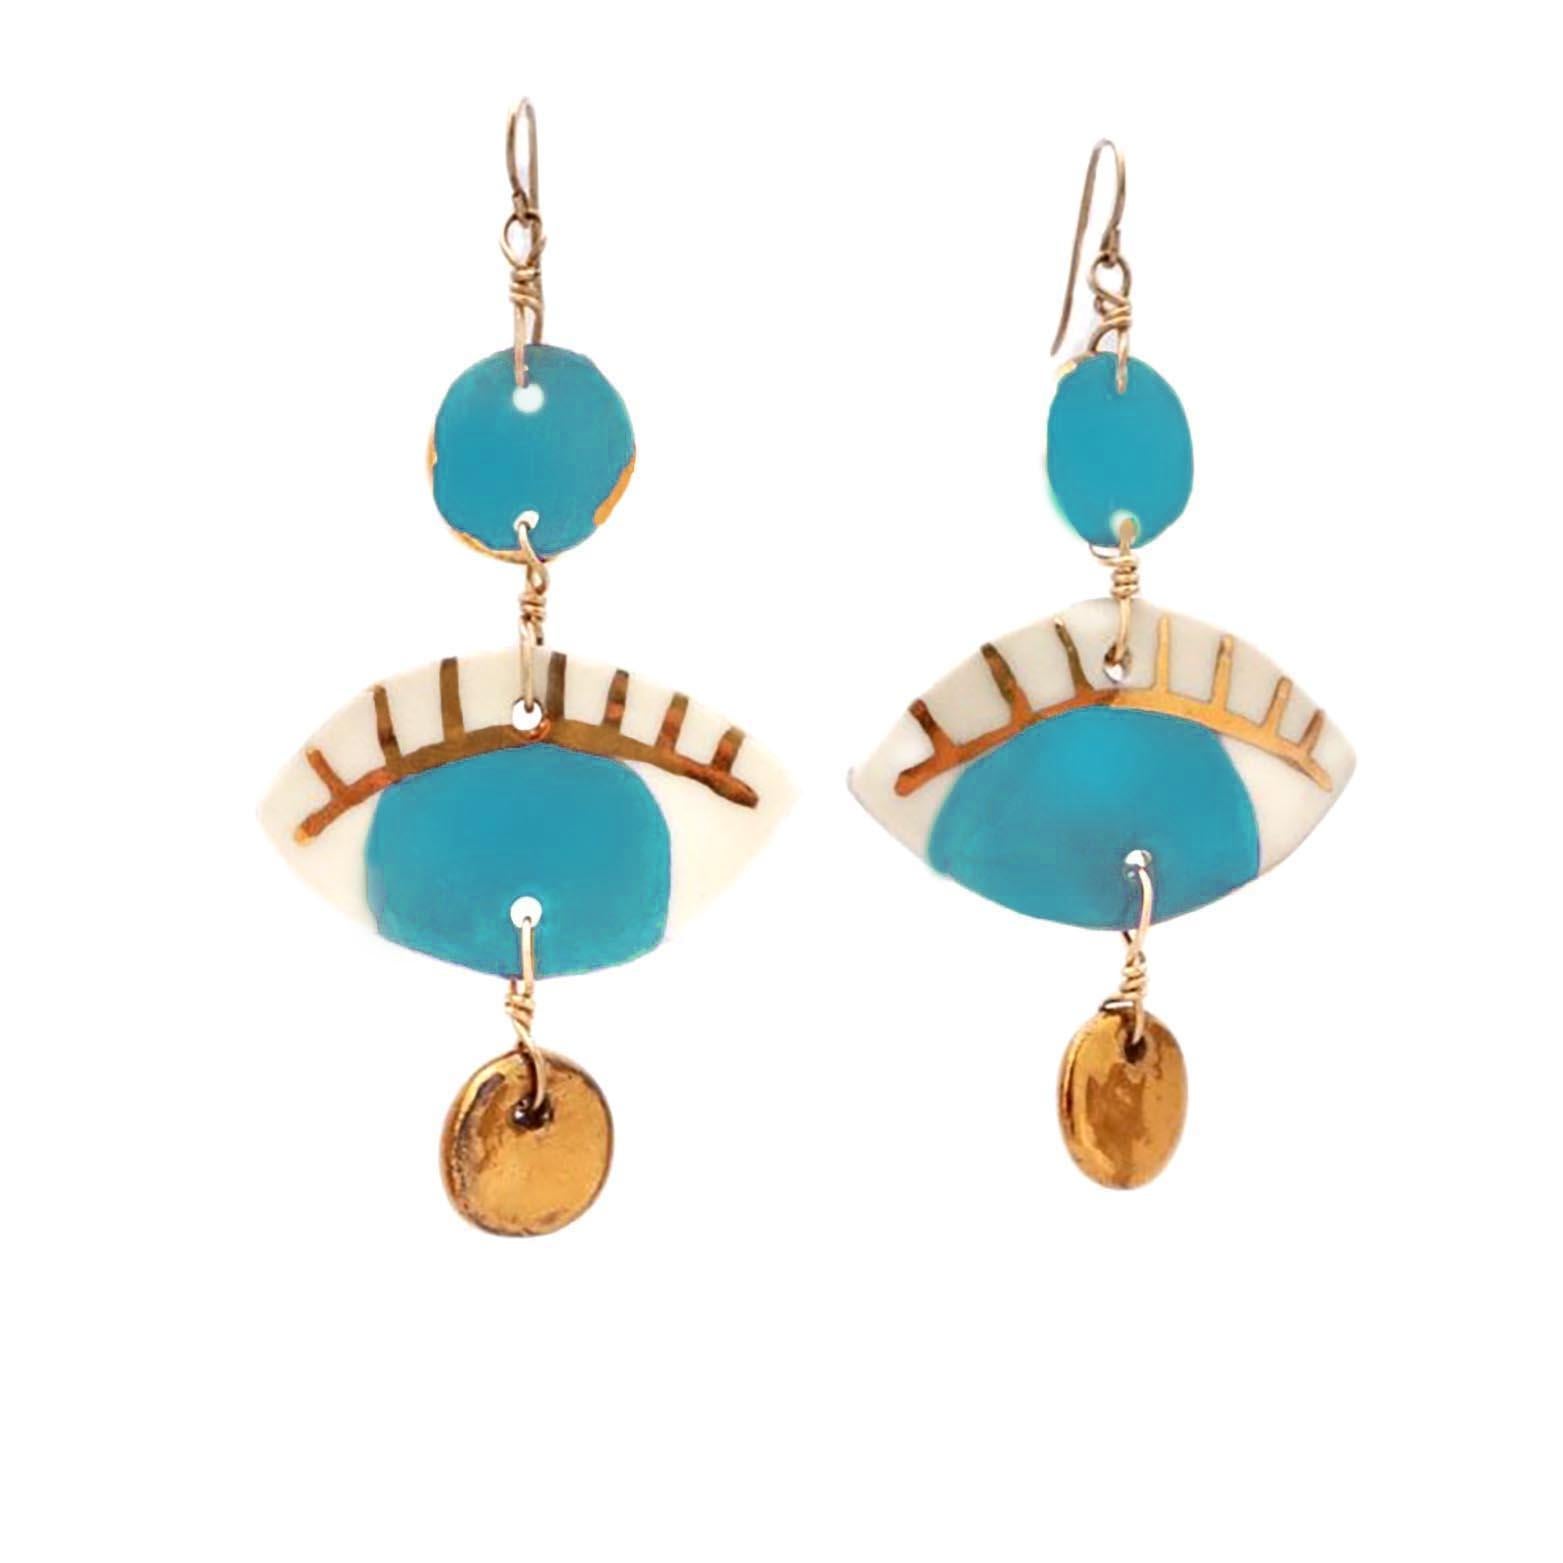 Handcrafted earrings in porcelain, painted in our deep and custom made jade glaze and with 14k gold leaf detail. Hypoallergenic gold-filled ear wire.  Each piece is hand made so slightly different from each other which gives our jewelry its unique